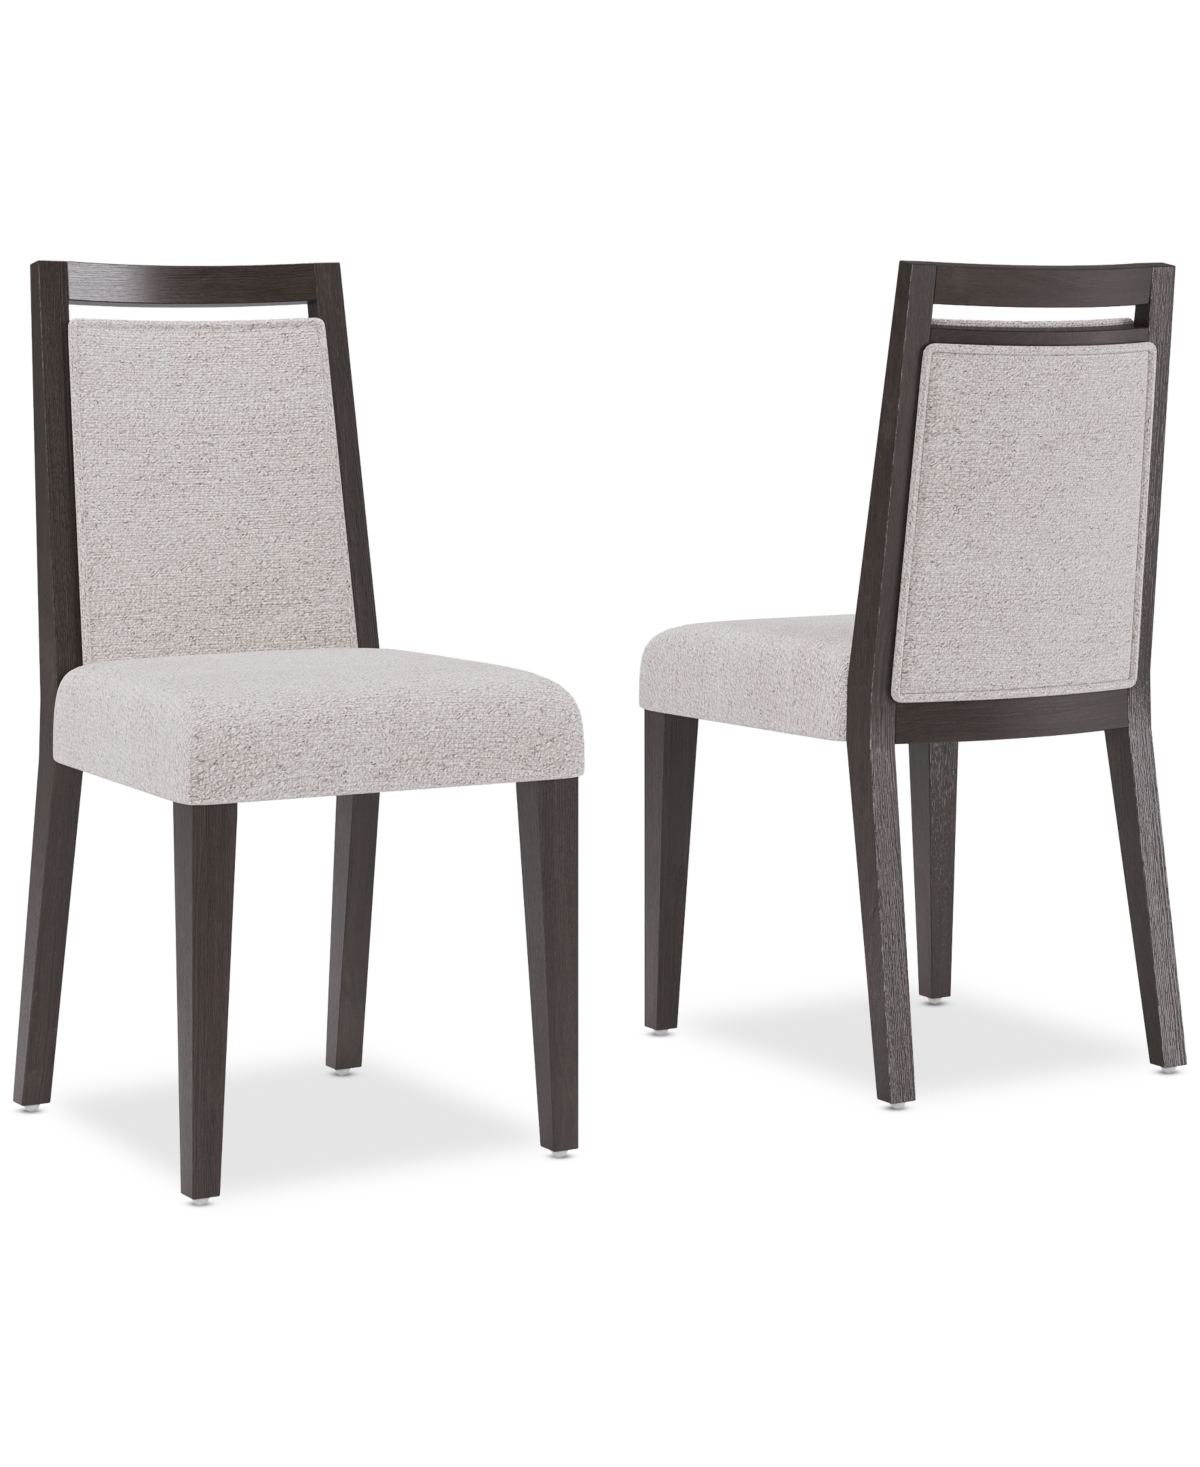 Macy's Tivie 2 Pc Wood Dining Chair Set In Brown